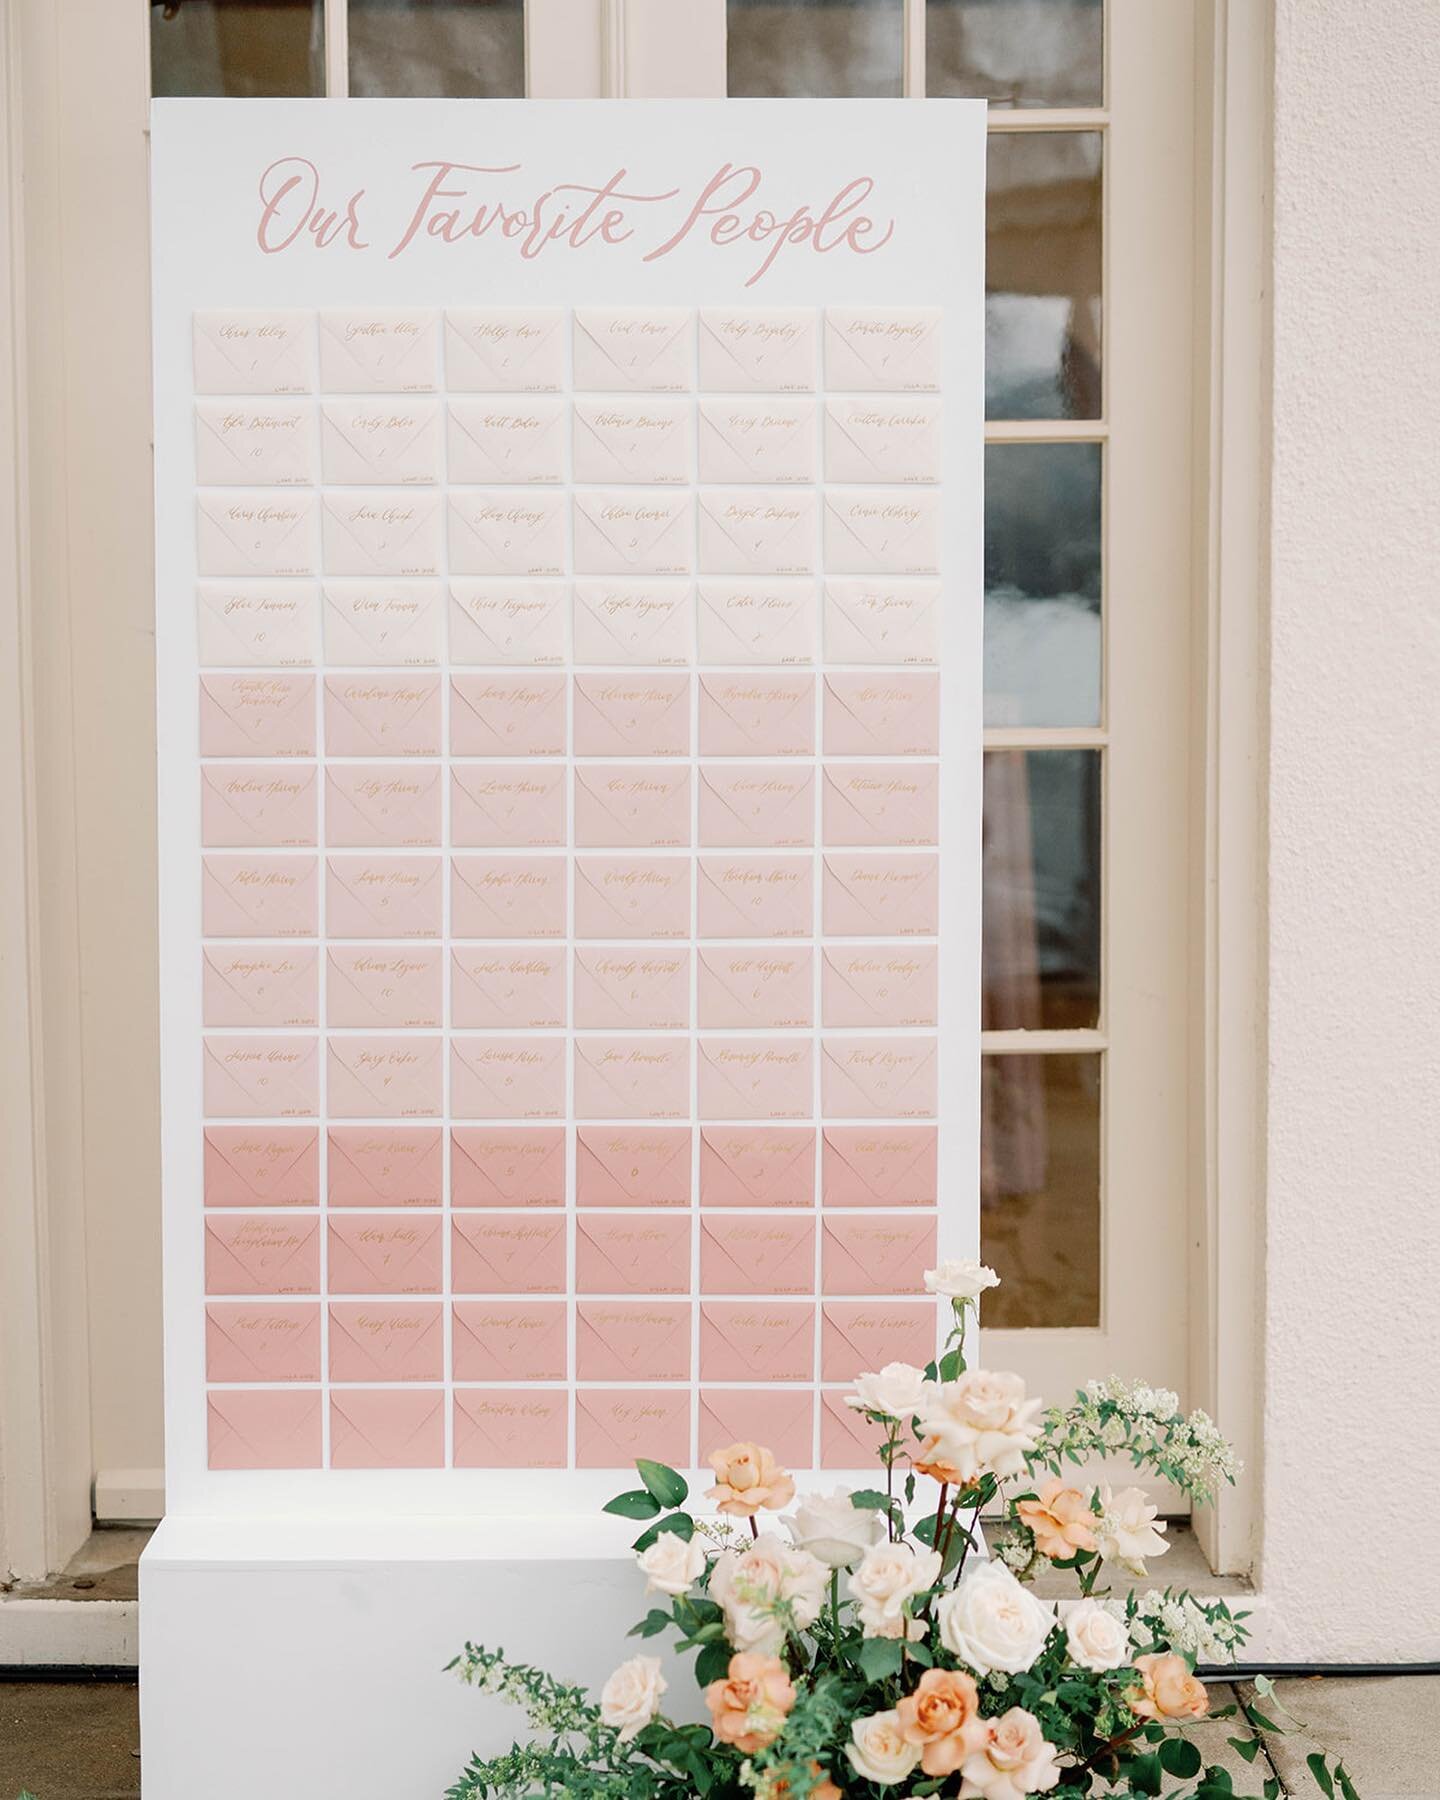 Tip: if you&rsquo;re planning to write each of your guests handwritten notes, either as escort cards or place cards, START EARLY. Knock out a few a day starting 1-2 months out! Don&rsquo;t wait until the week of your wedding to write 100+ personalize